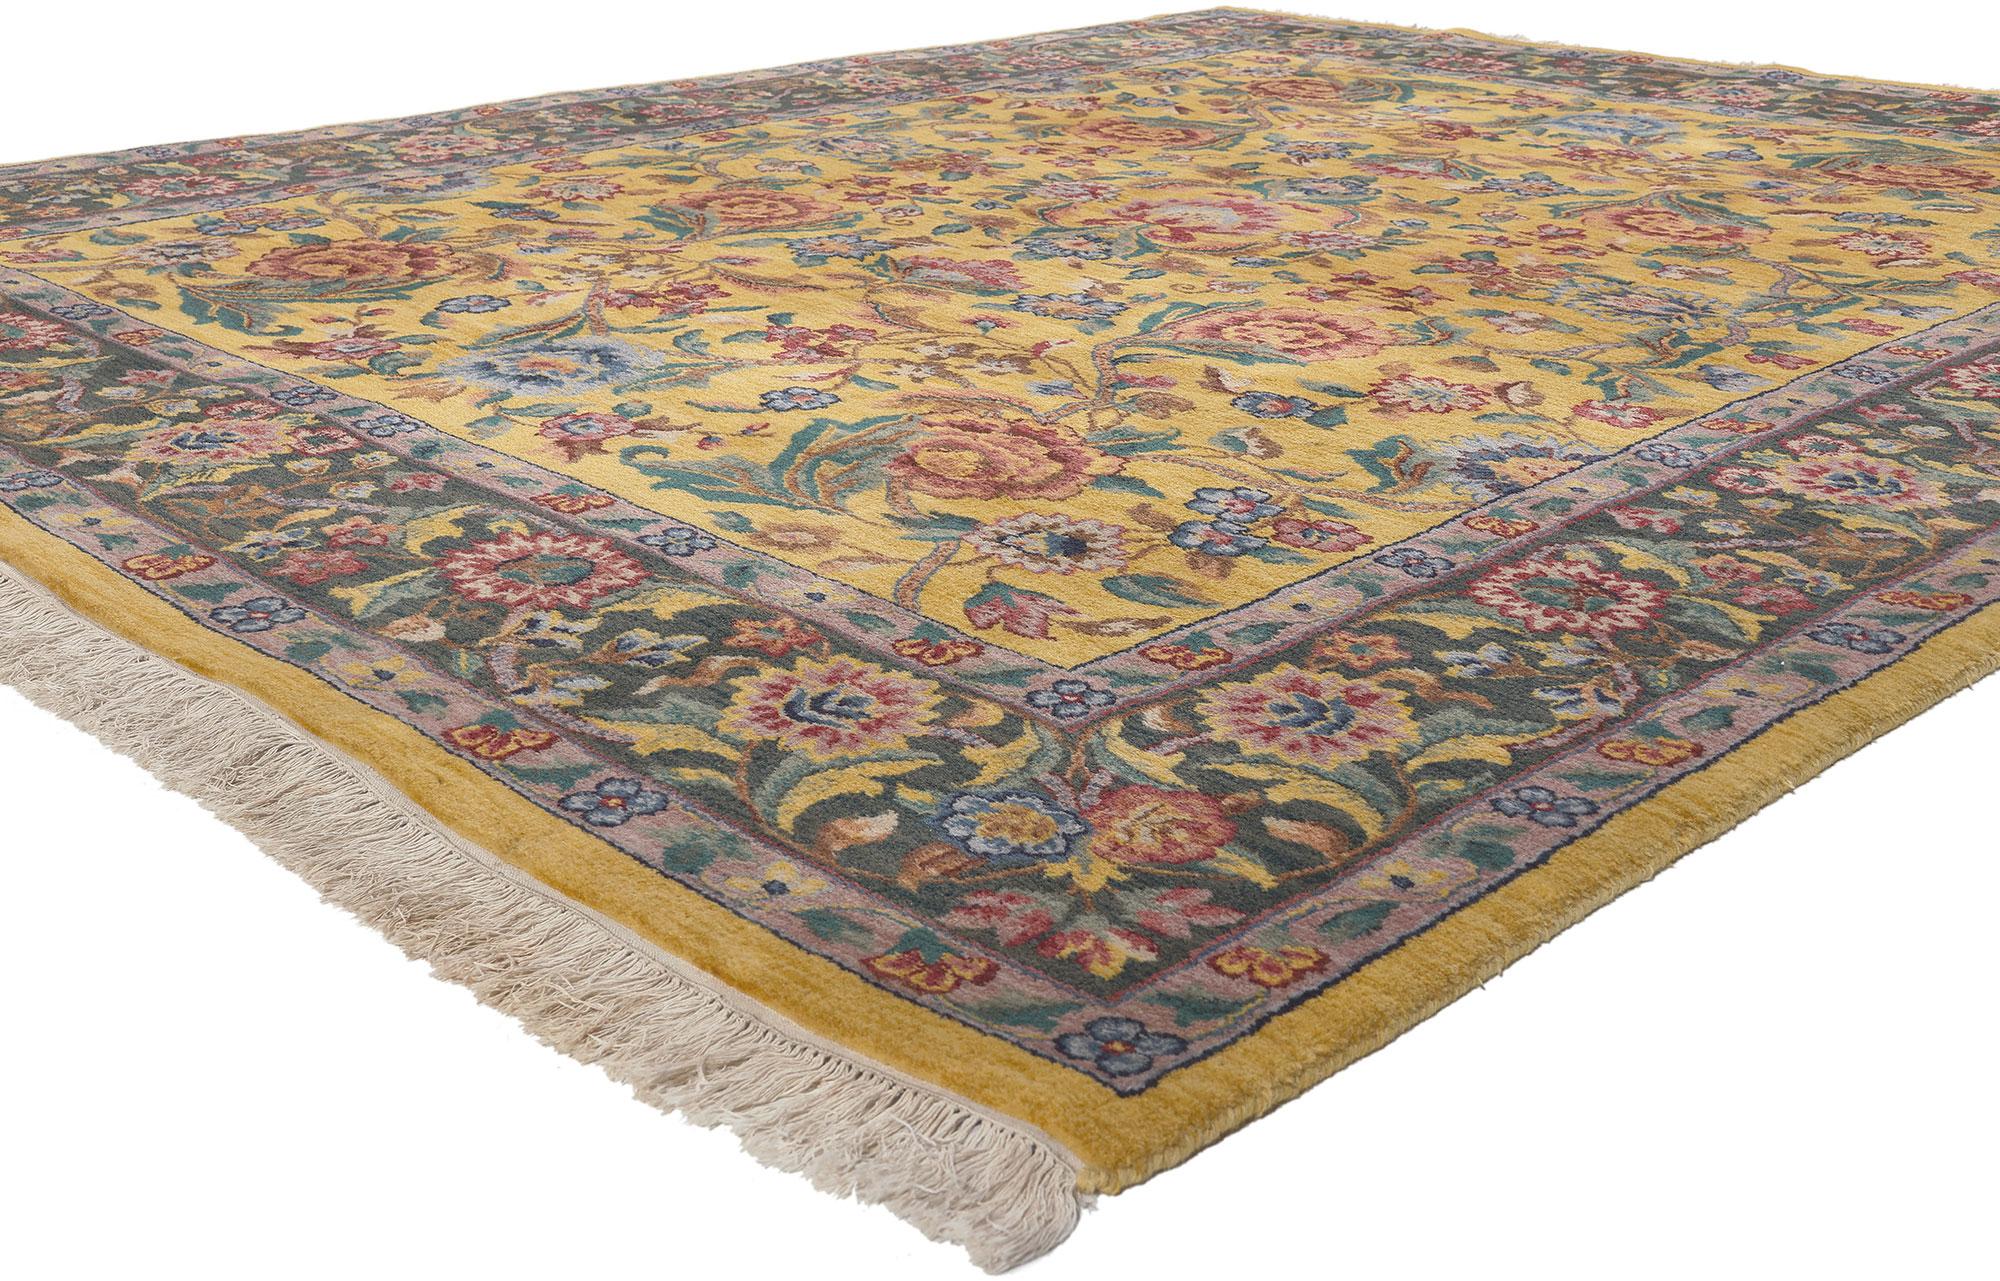 74959 Vintage Indian Tabriz Rug, 07'10 X 09'09. Indian Tabriz rugs are exquisite handcrafted carpets inspired by the renowned Persian Tabriz tradition, typically made in India. These rugs feature intricate designs and motifs, often including a